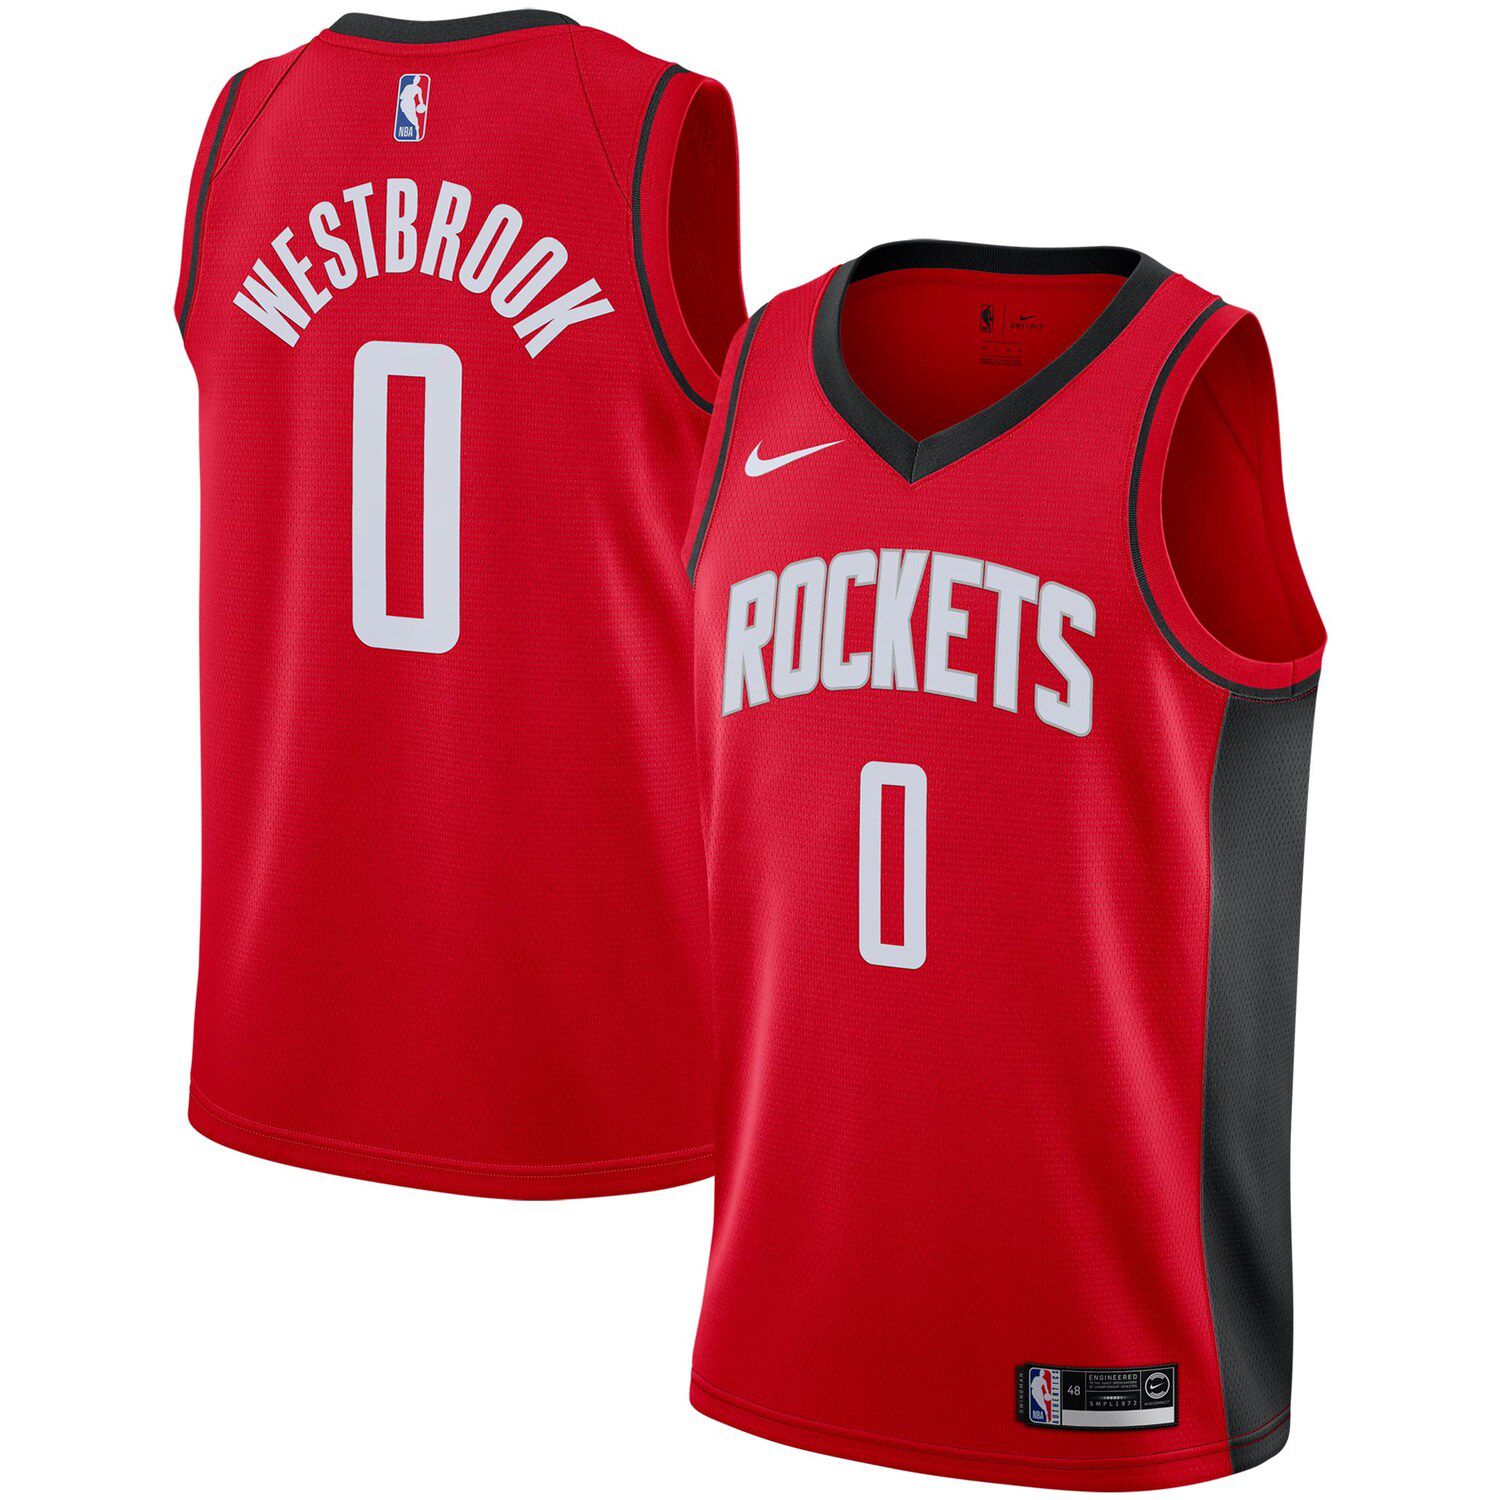 the rockets jersey